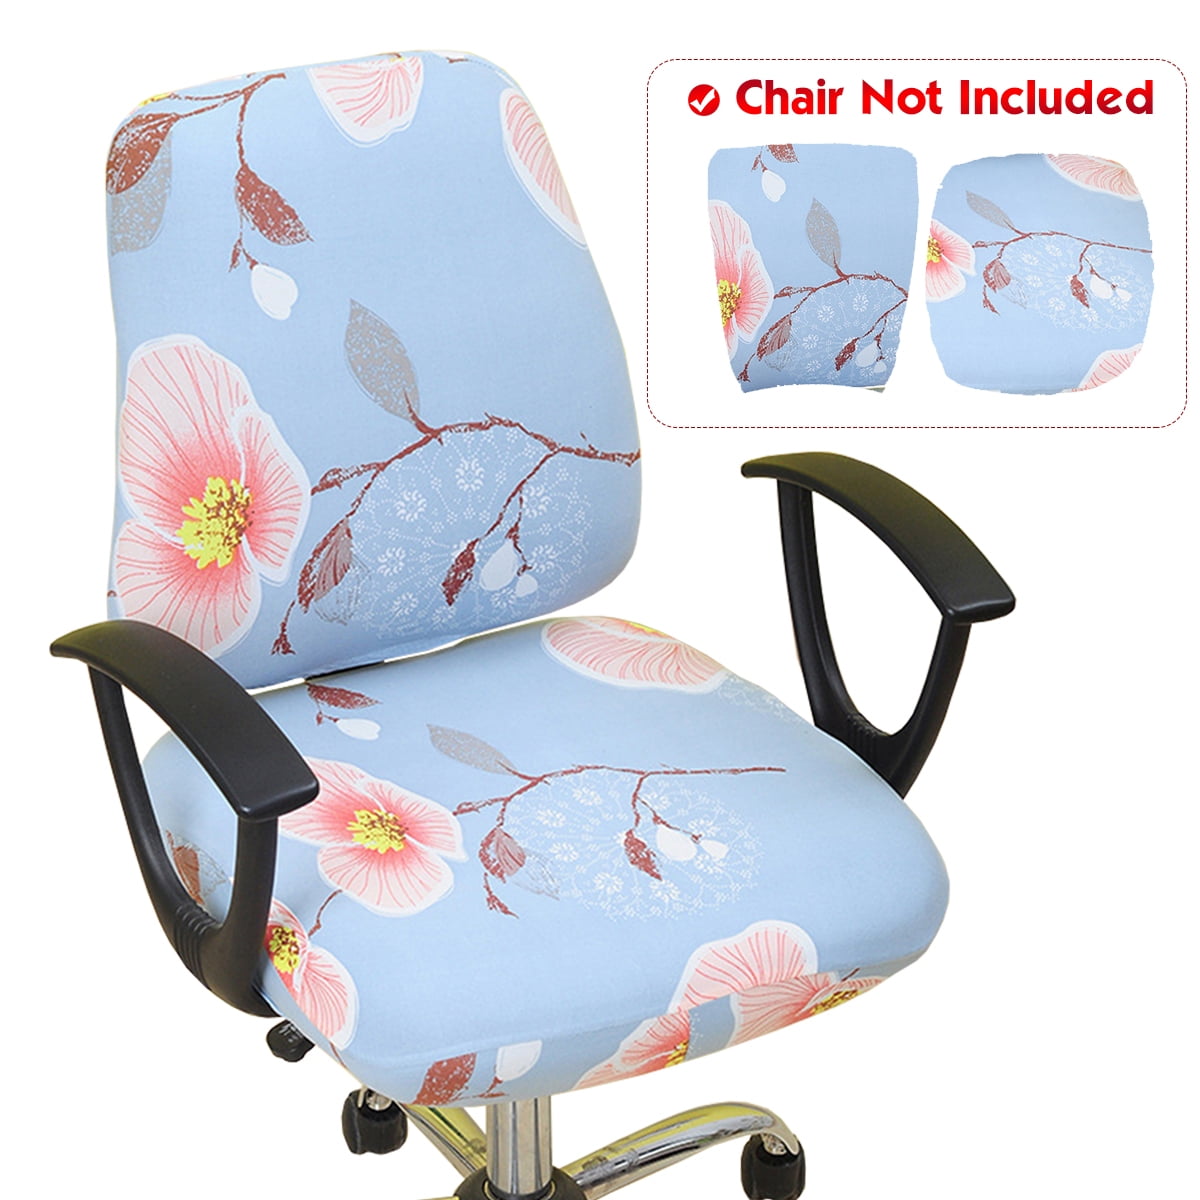 Universal Chair Covers Armchair Seat Covers Removable Swivel Chair Slipcovers 